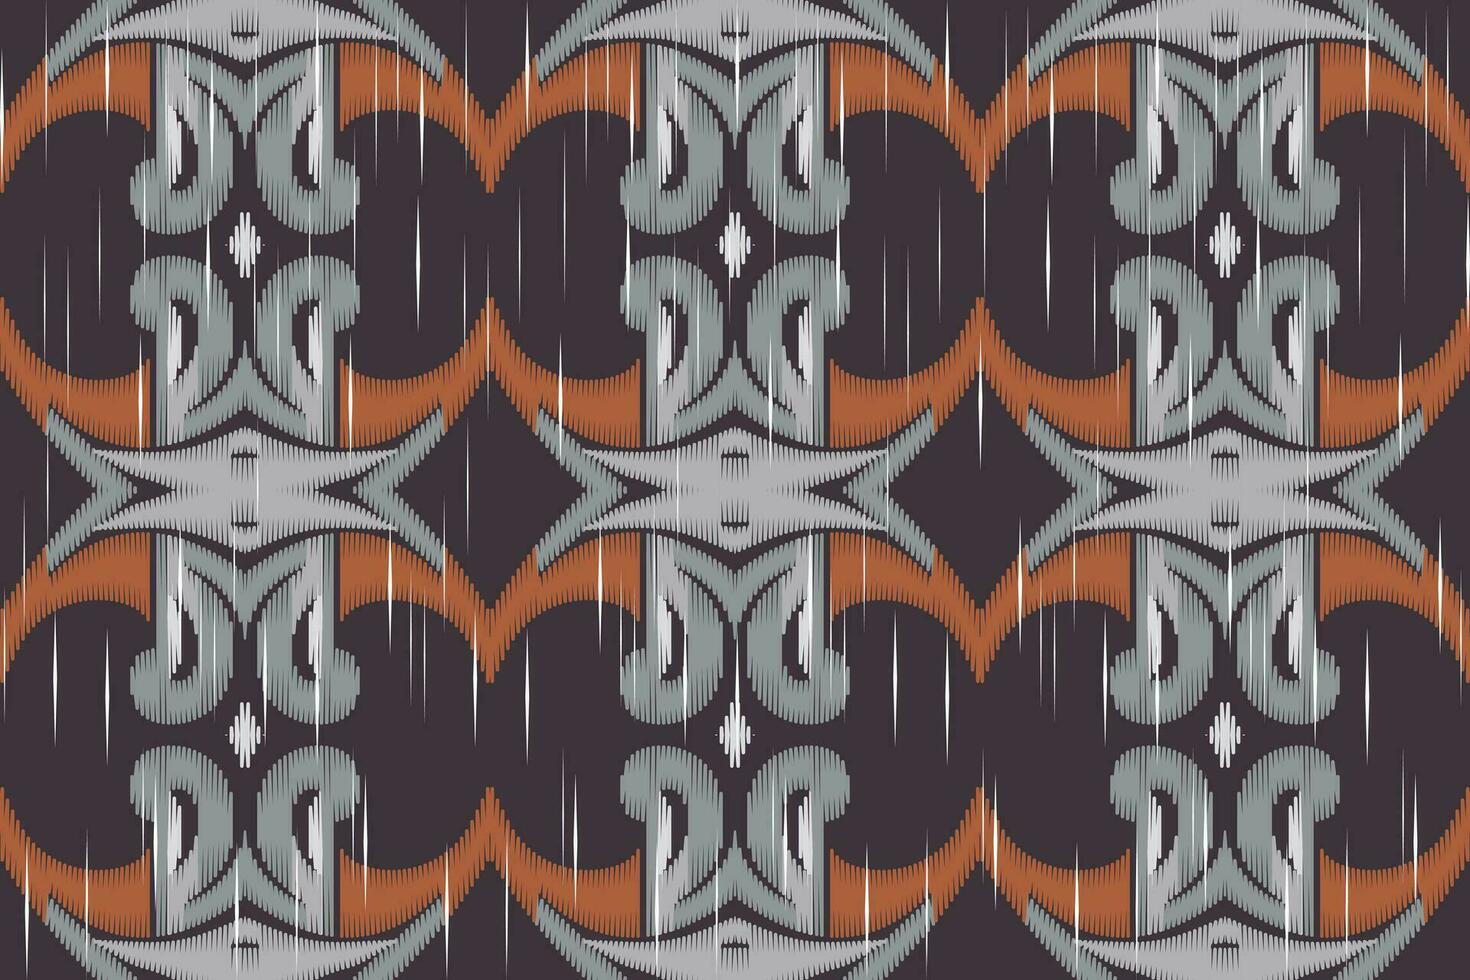 Ikat Seamless Pattern Embroidery Background. Ikat Prints Geometric Ethnic Oriental Pattern Traditional. Ikat Aztec Style Abstract Design for Print Texture,fabric,saree,sari,carpet. vector